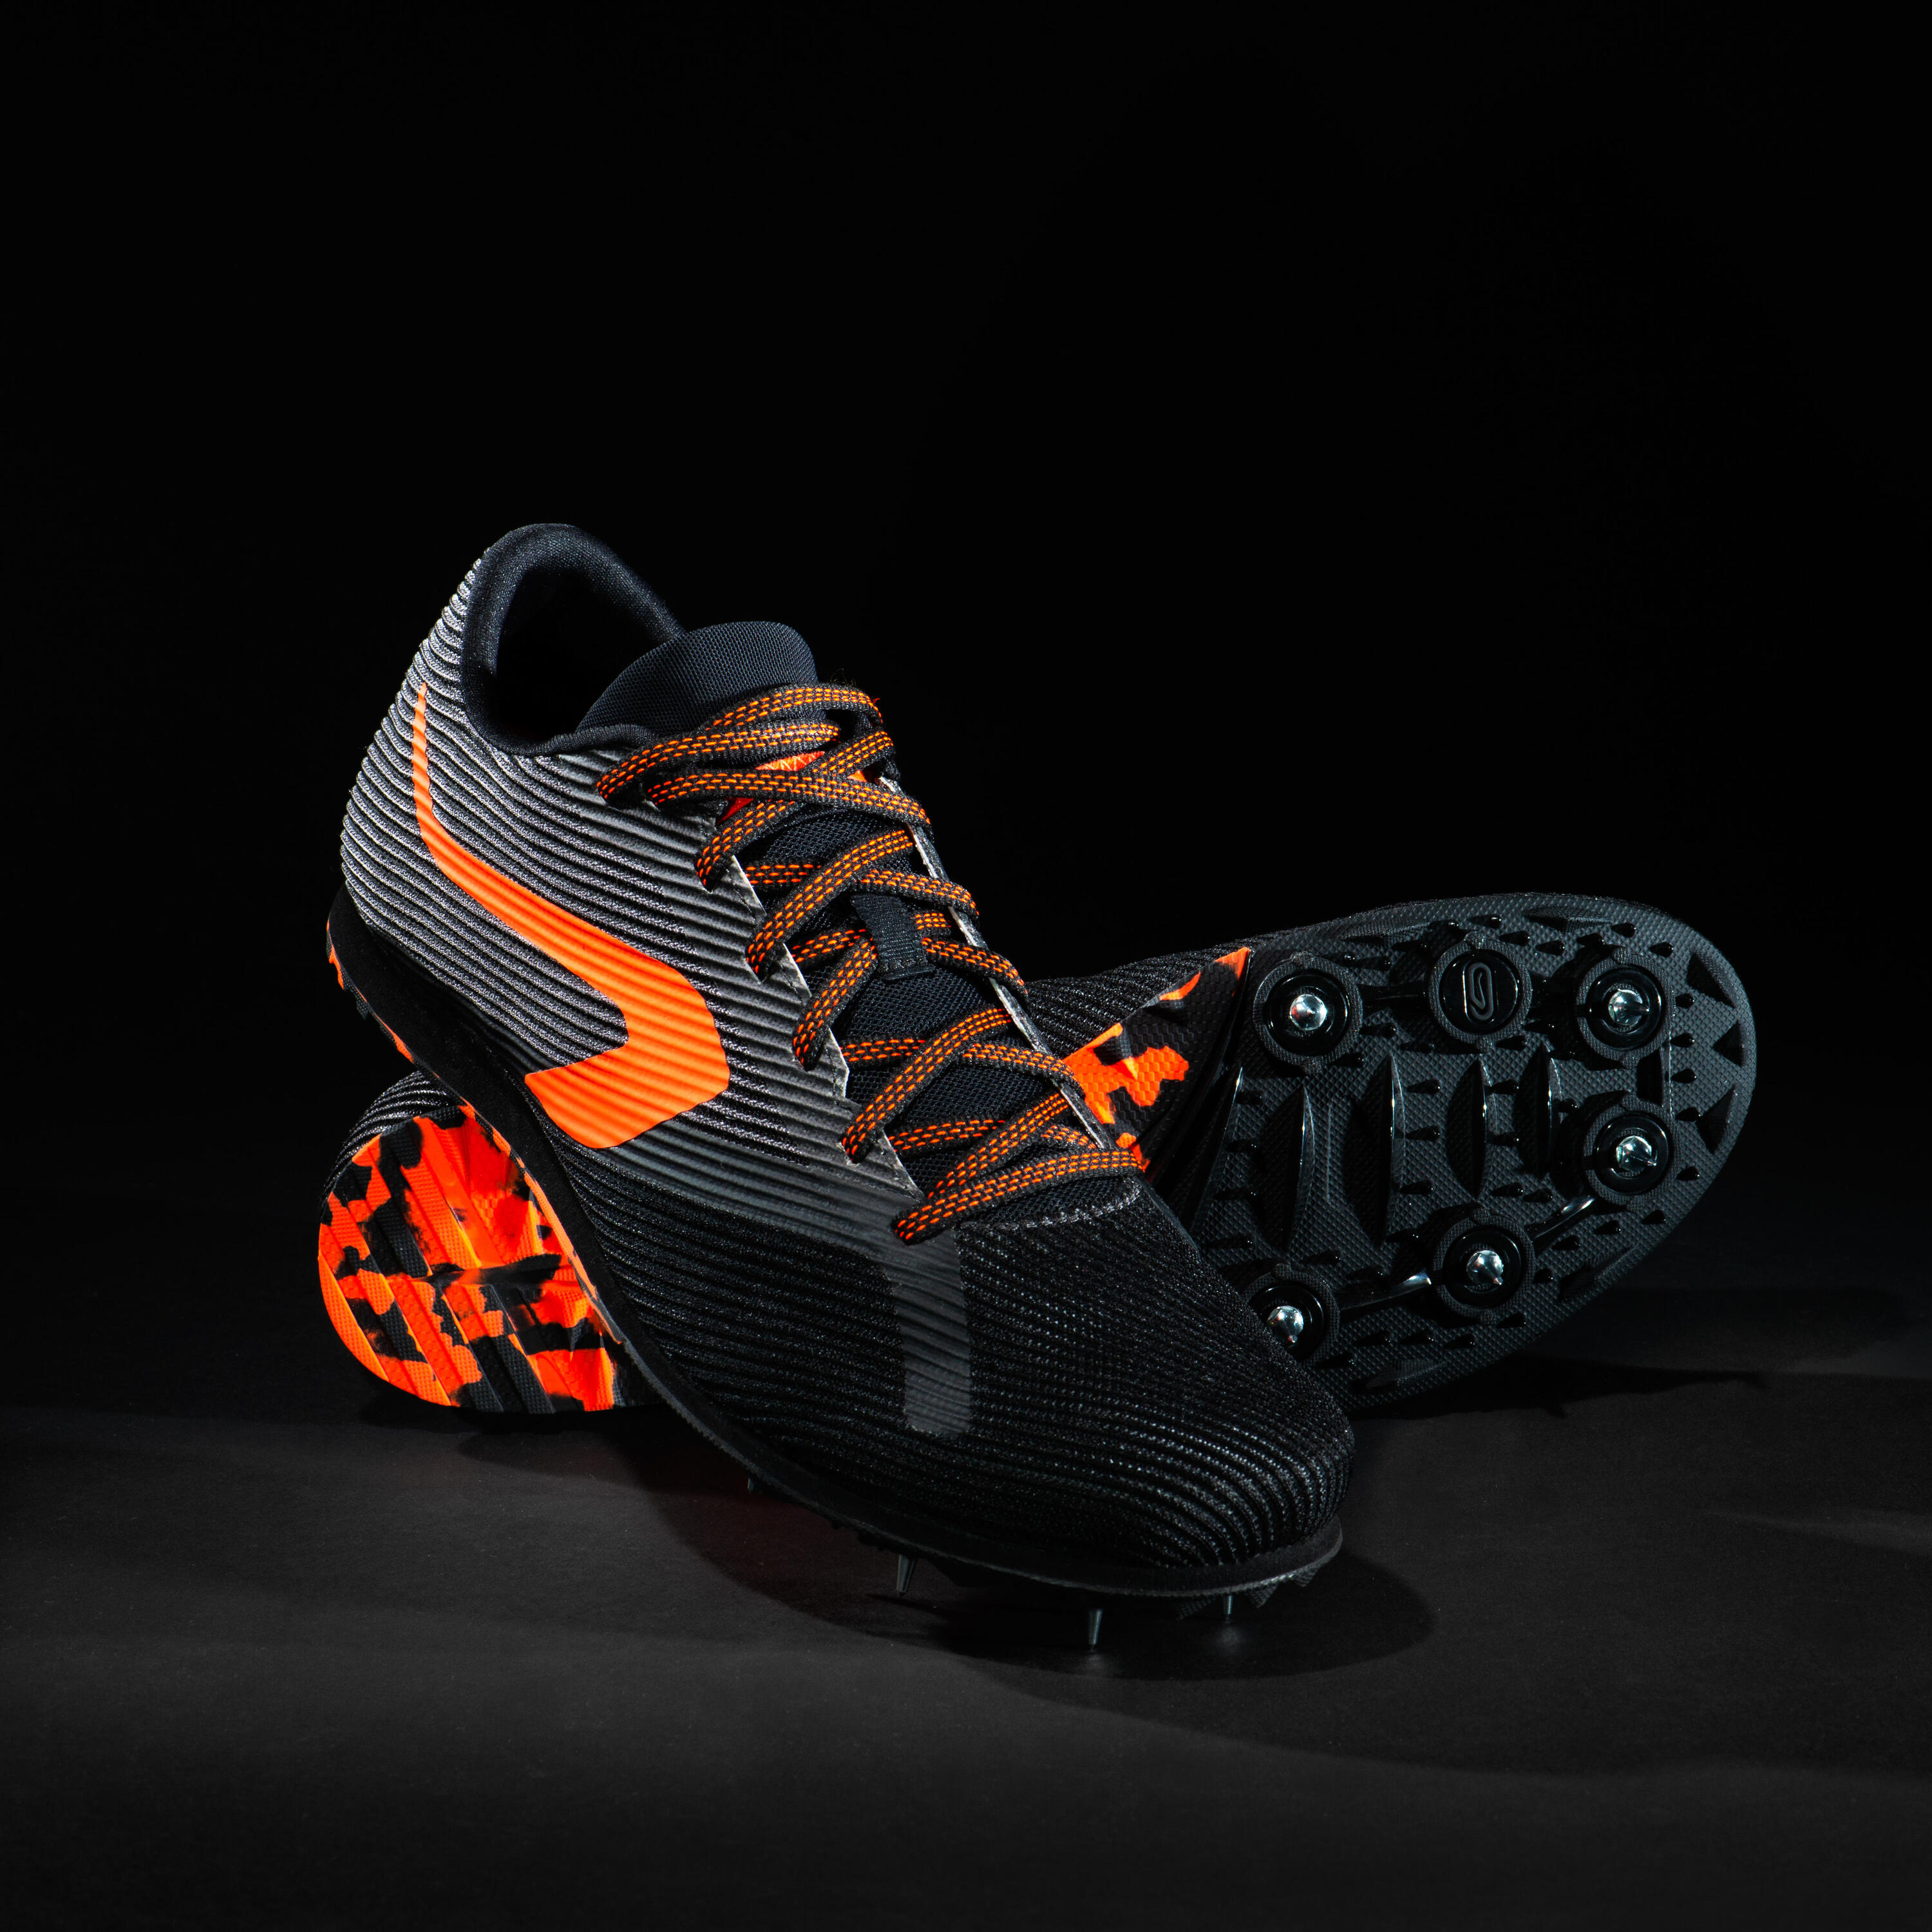 ATHLETICS CROSS-COUNTRY SHOES WITH SPIKES - BLACK/ORANGE 7/8